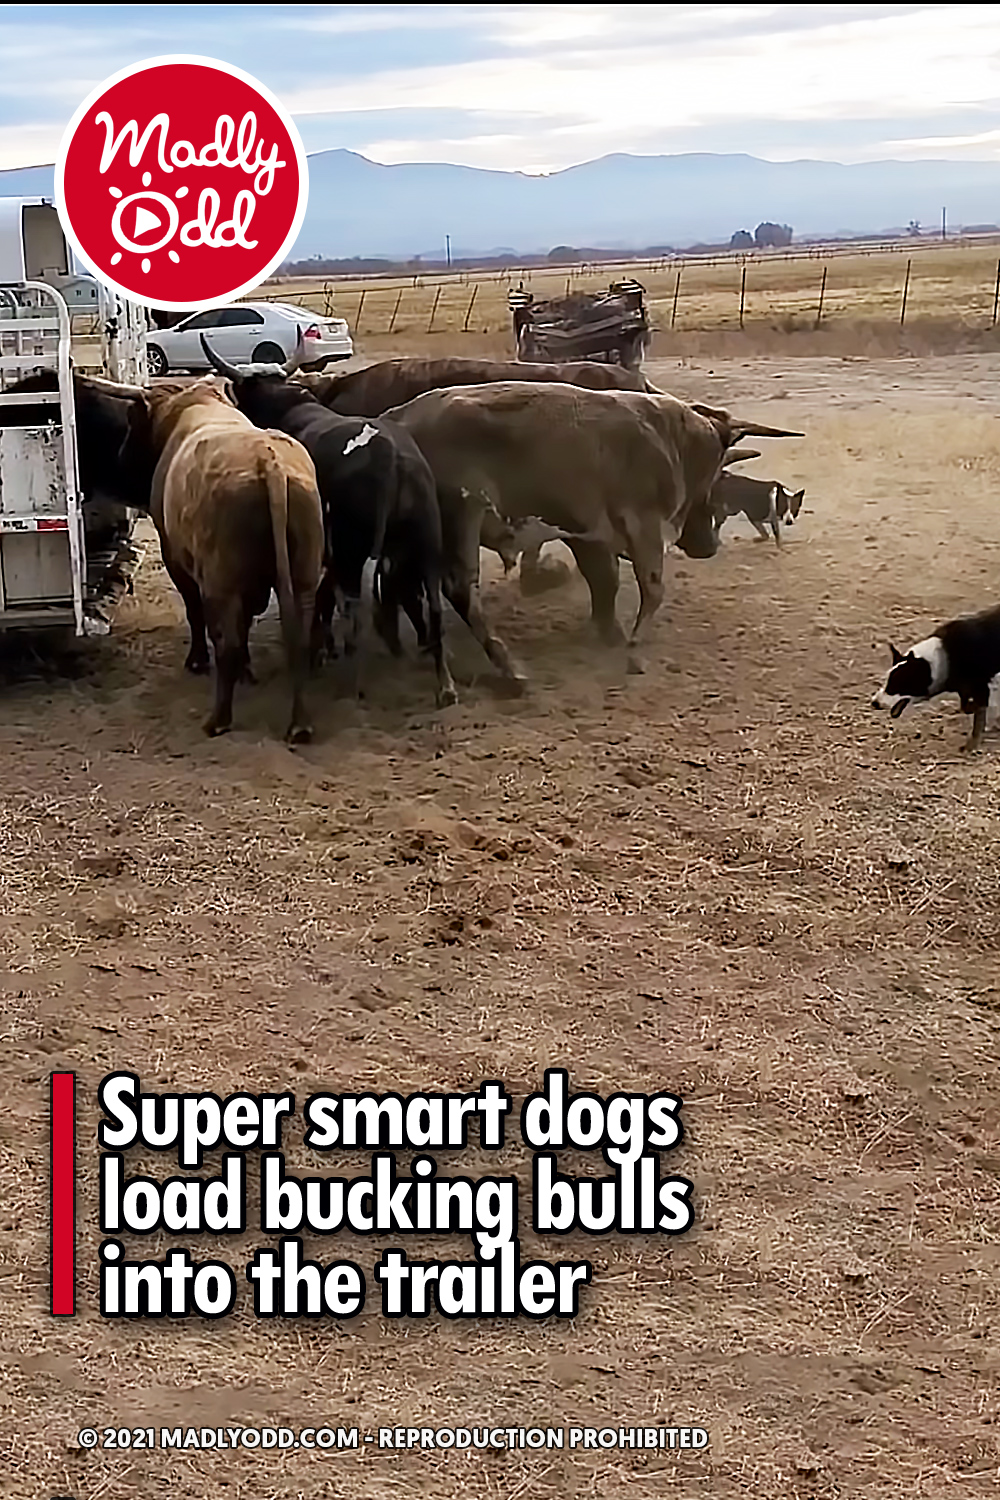 Super smart dogs load bucking bulls into the trailer